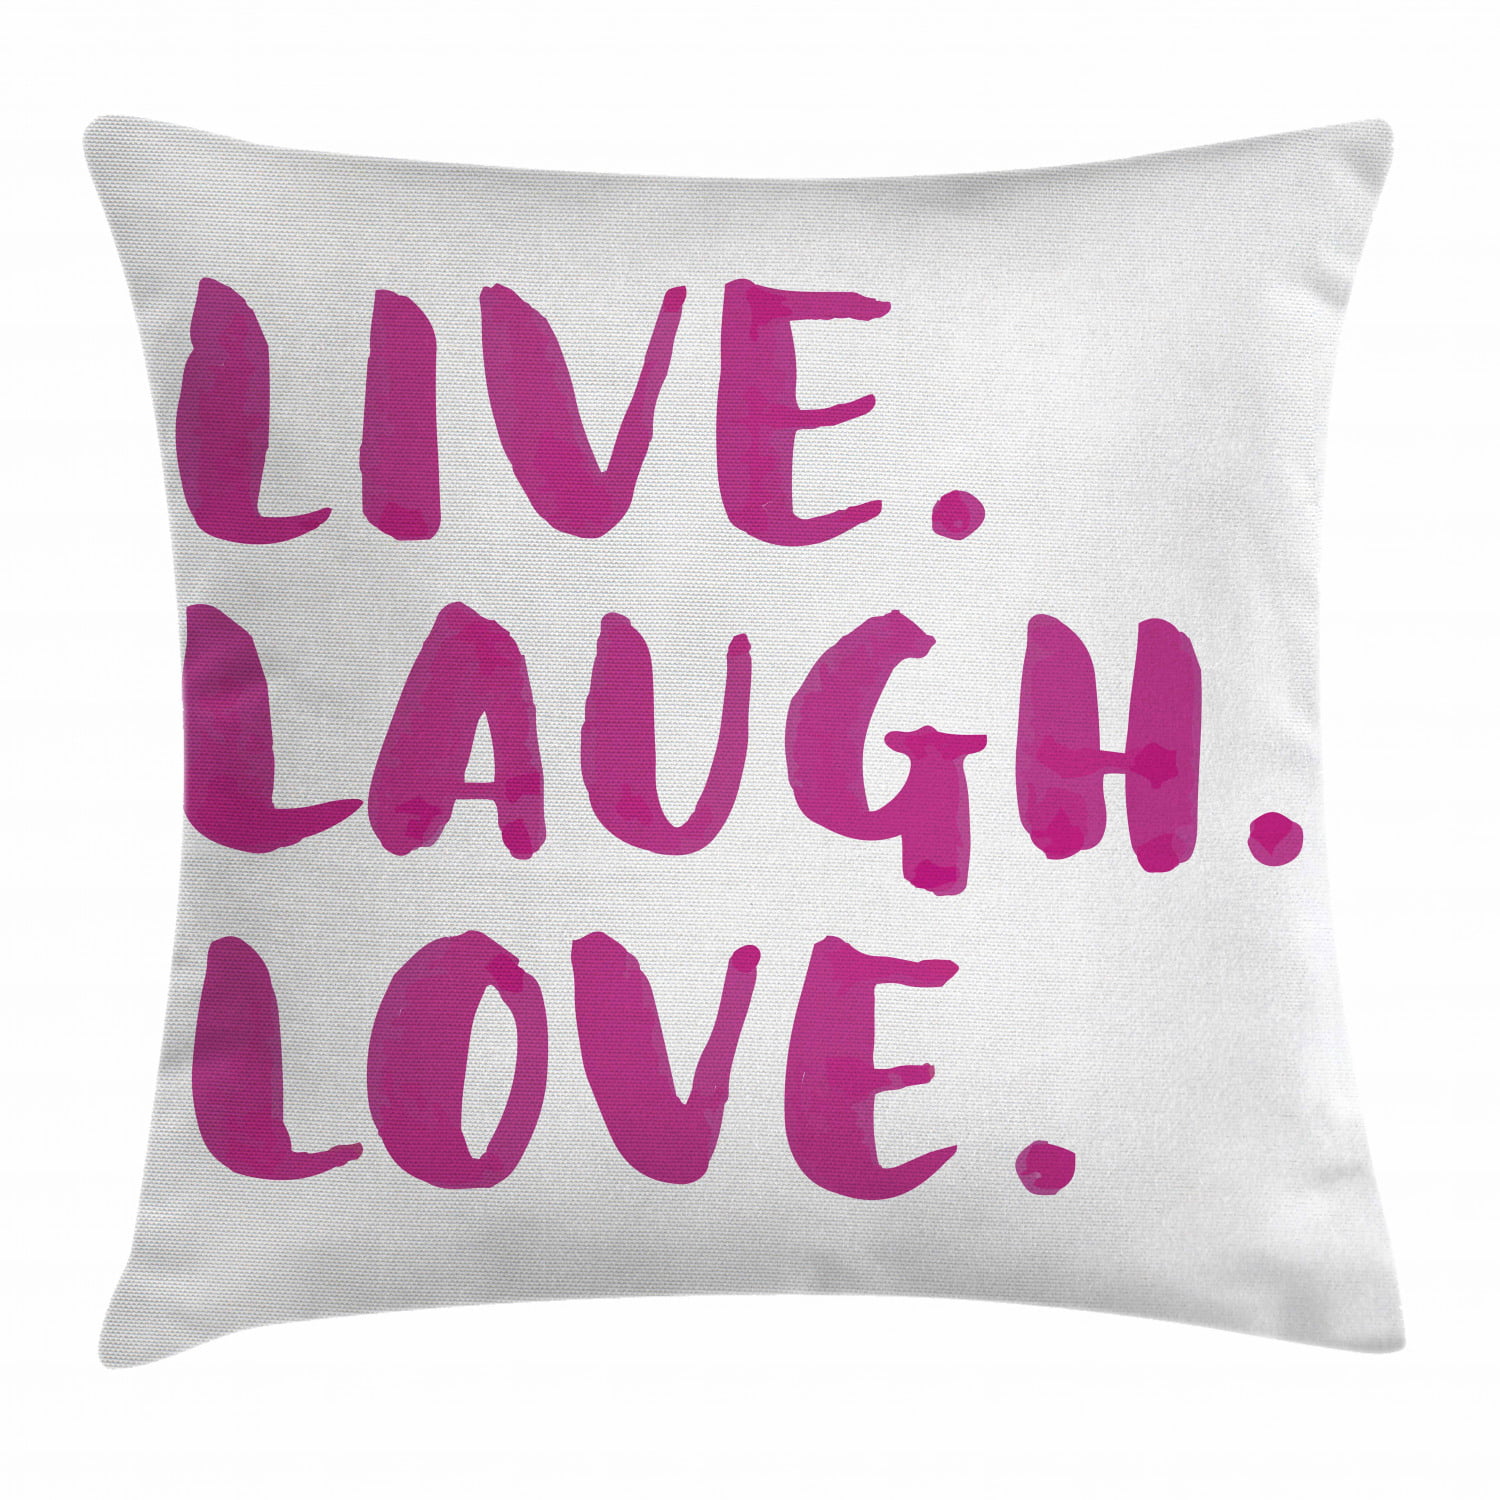 Live Laugh Love Decor Throw Pillow Cushion Cover, Happy Life Message ...